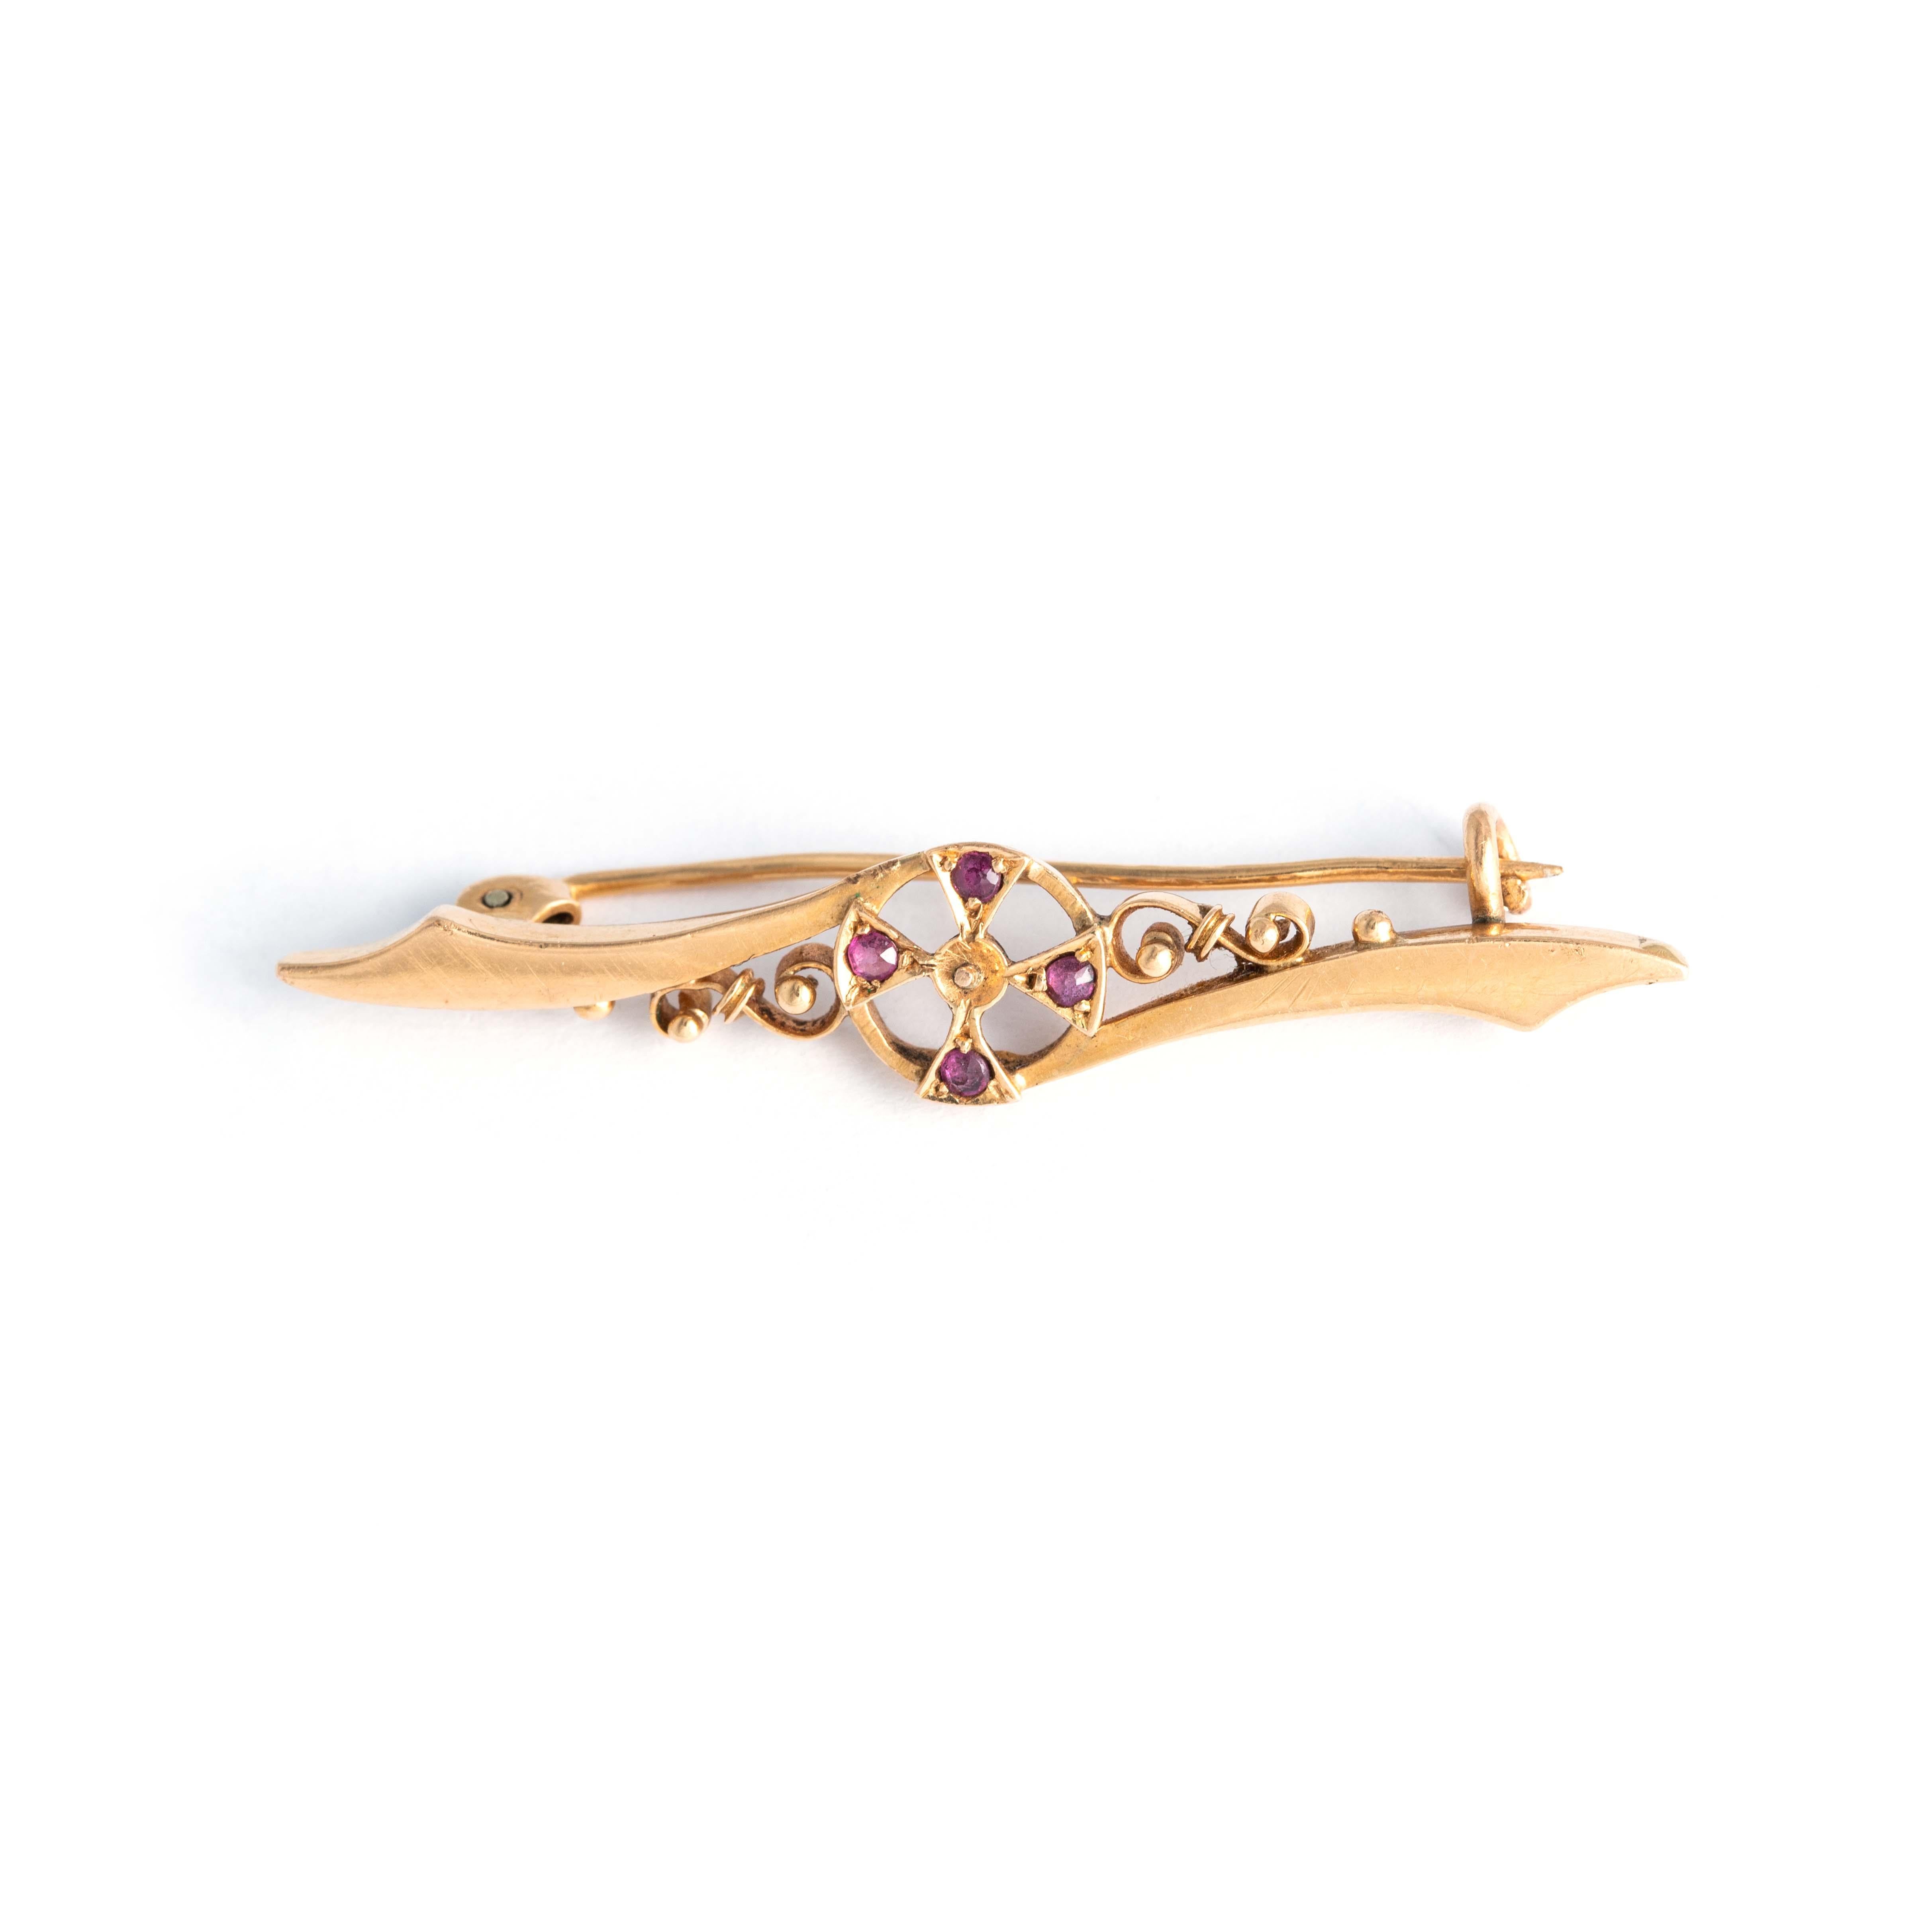 14K yellow gold brooch set by four red stones.
Length: 4.20 centimeters. 
Gross weight: 2.27 grams.